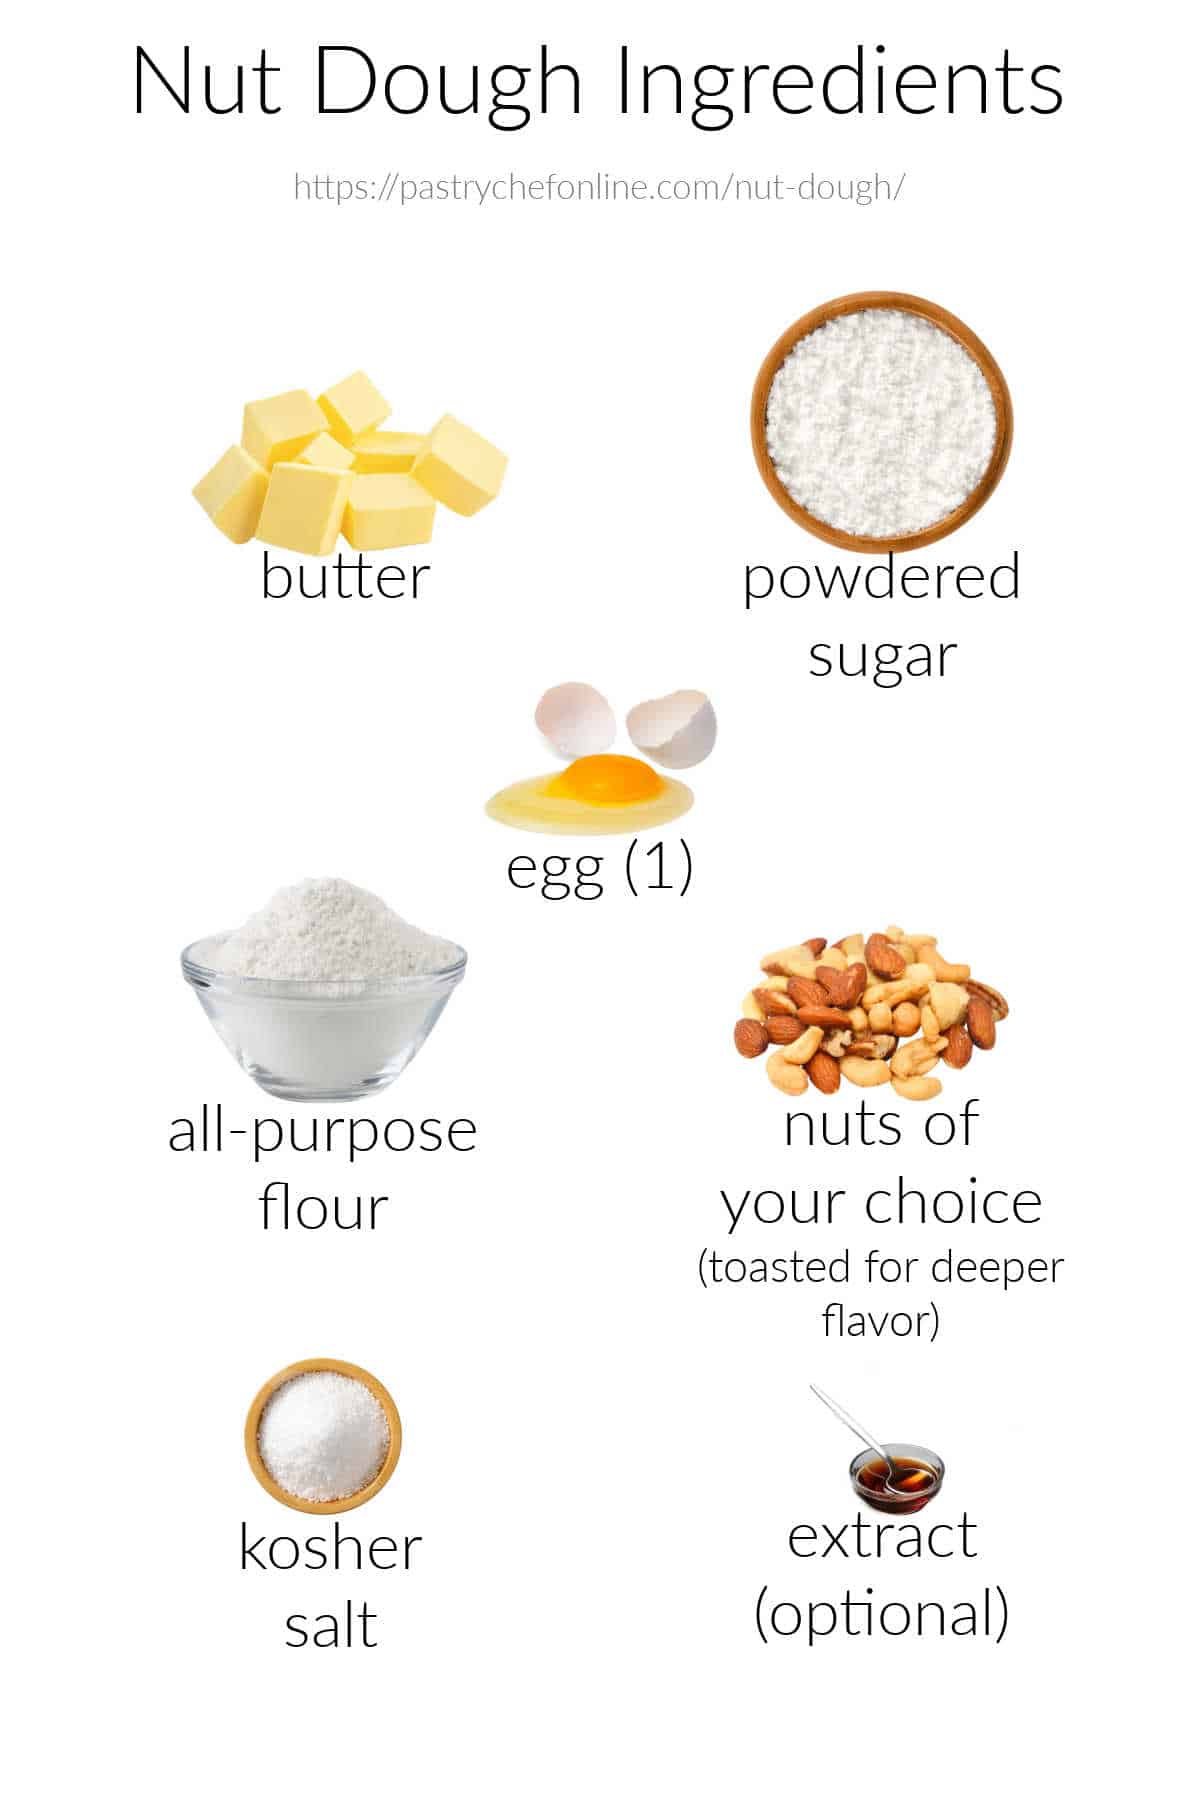 The ingredients needed to make nut dough: butter, powdered sugar, egg (1), all-purpose flour, nuts of choice, kosher salt, and extract (optional).